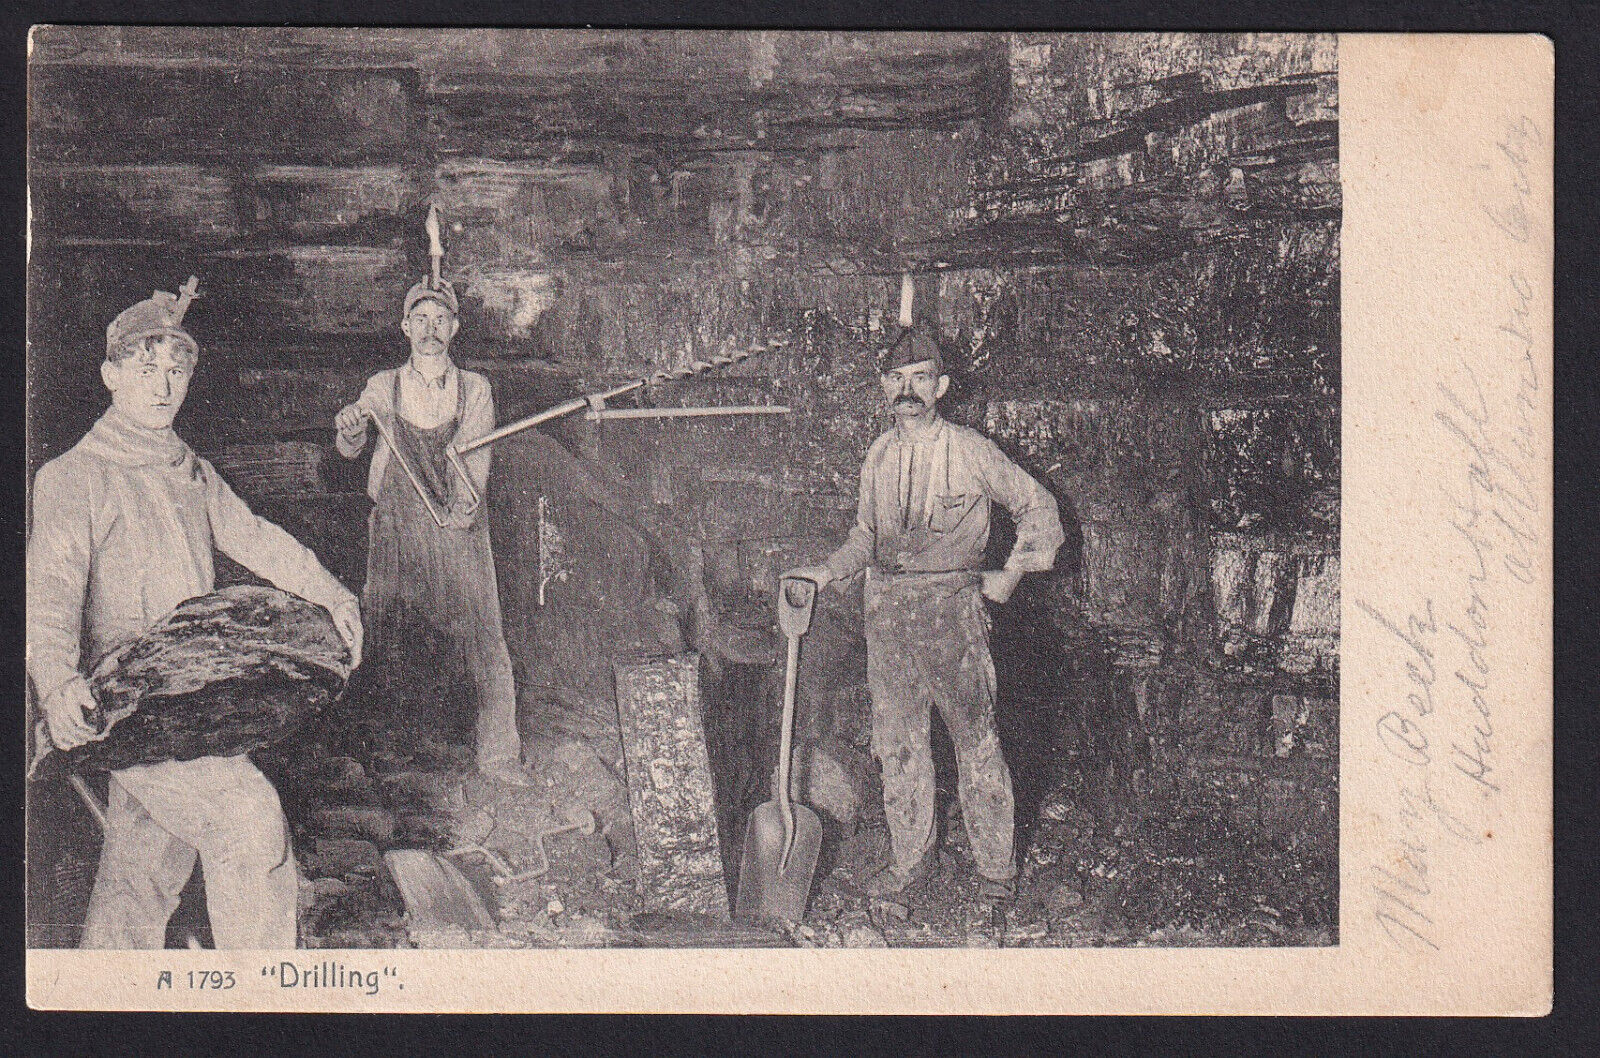 Drilling-Miners-Mining-Rotograph A 1793-Antique Postcard